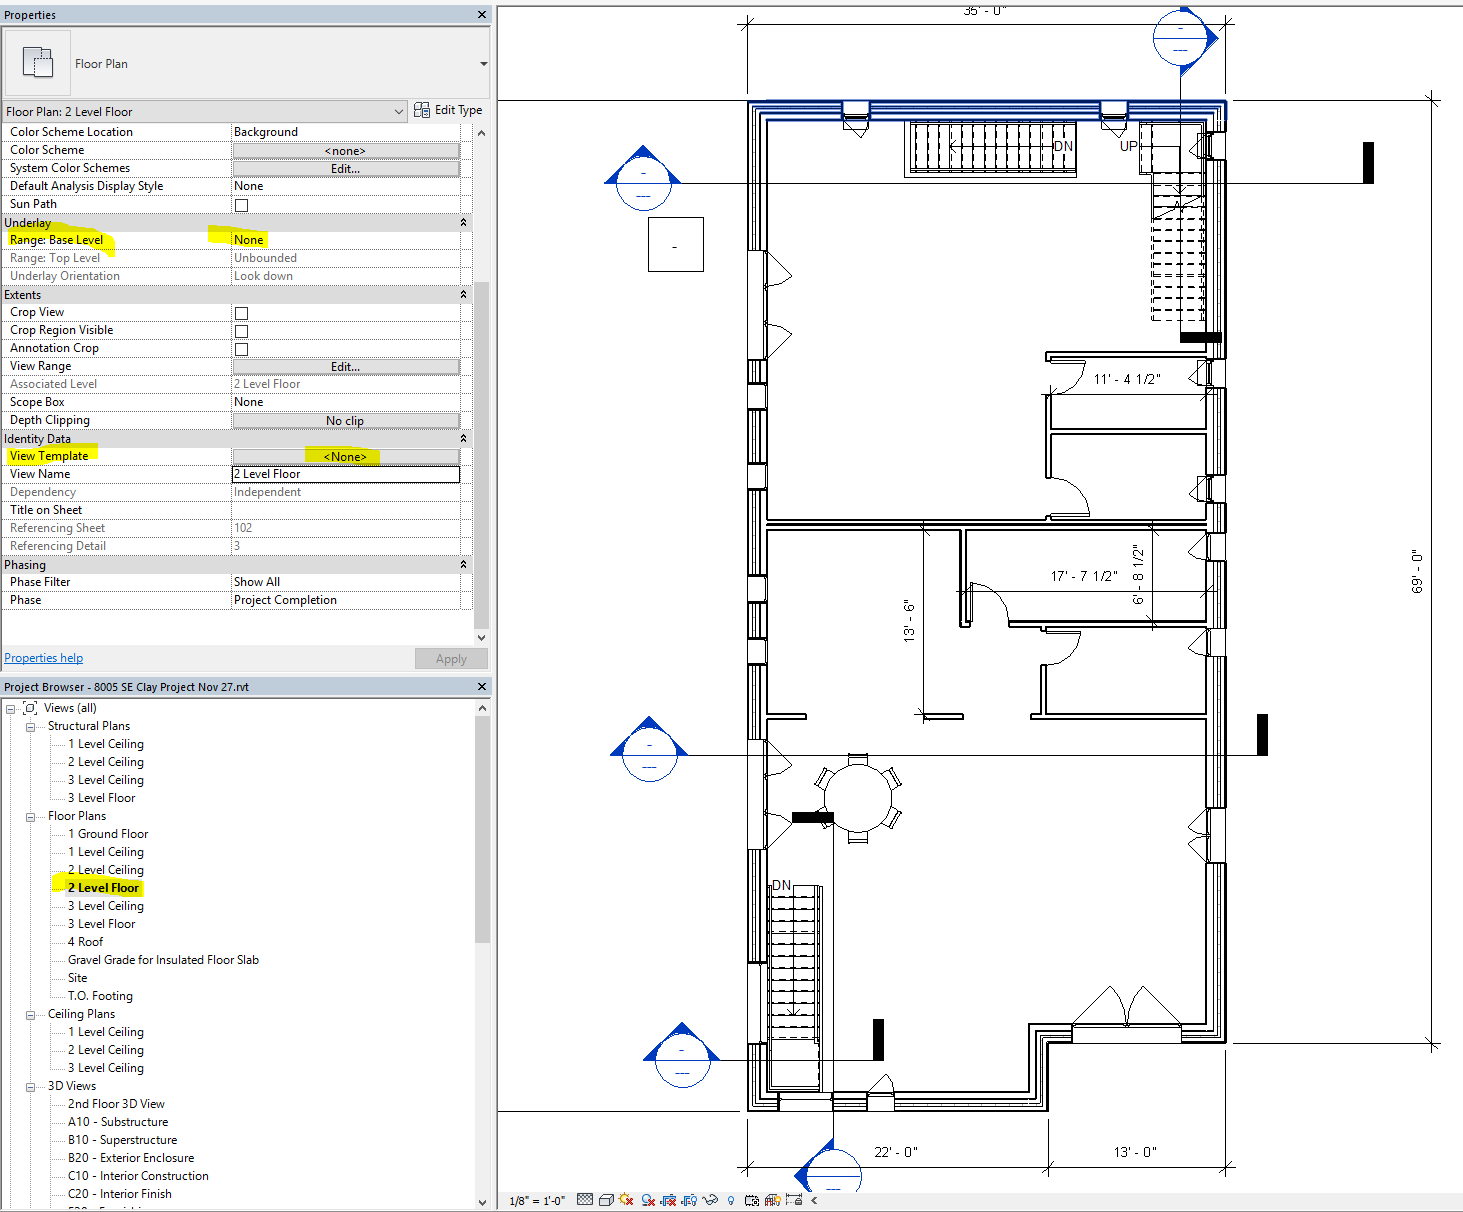 Solved Revit Floor Plan Showing Objects from Floor Above